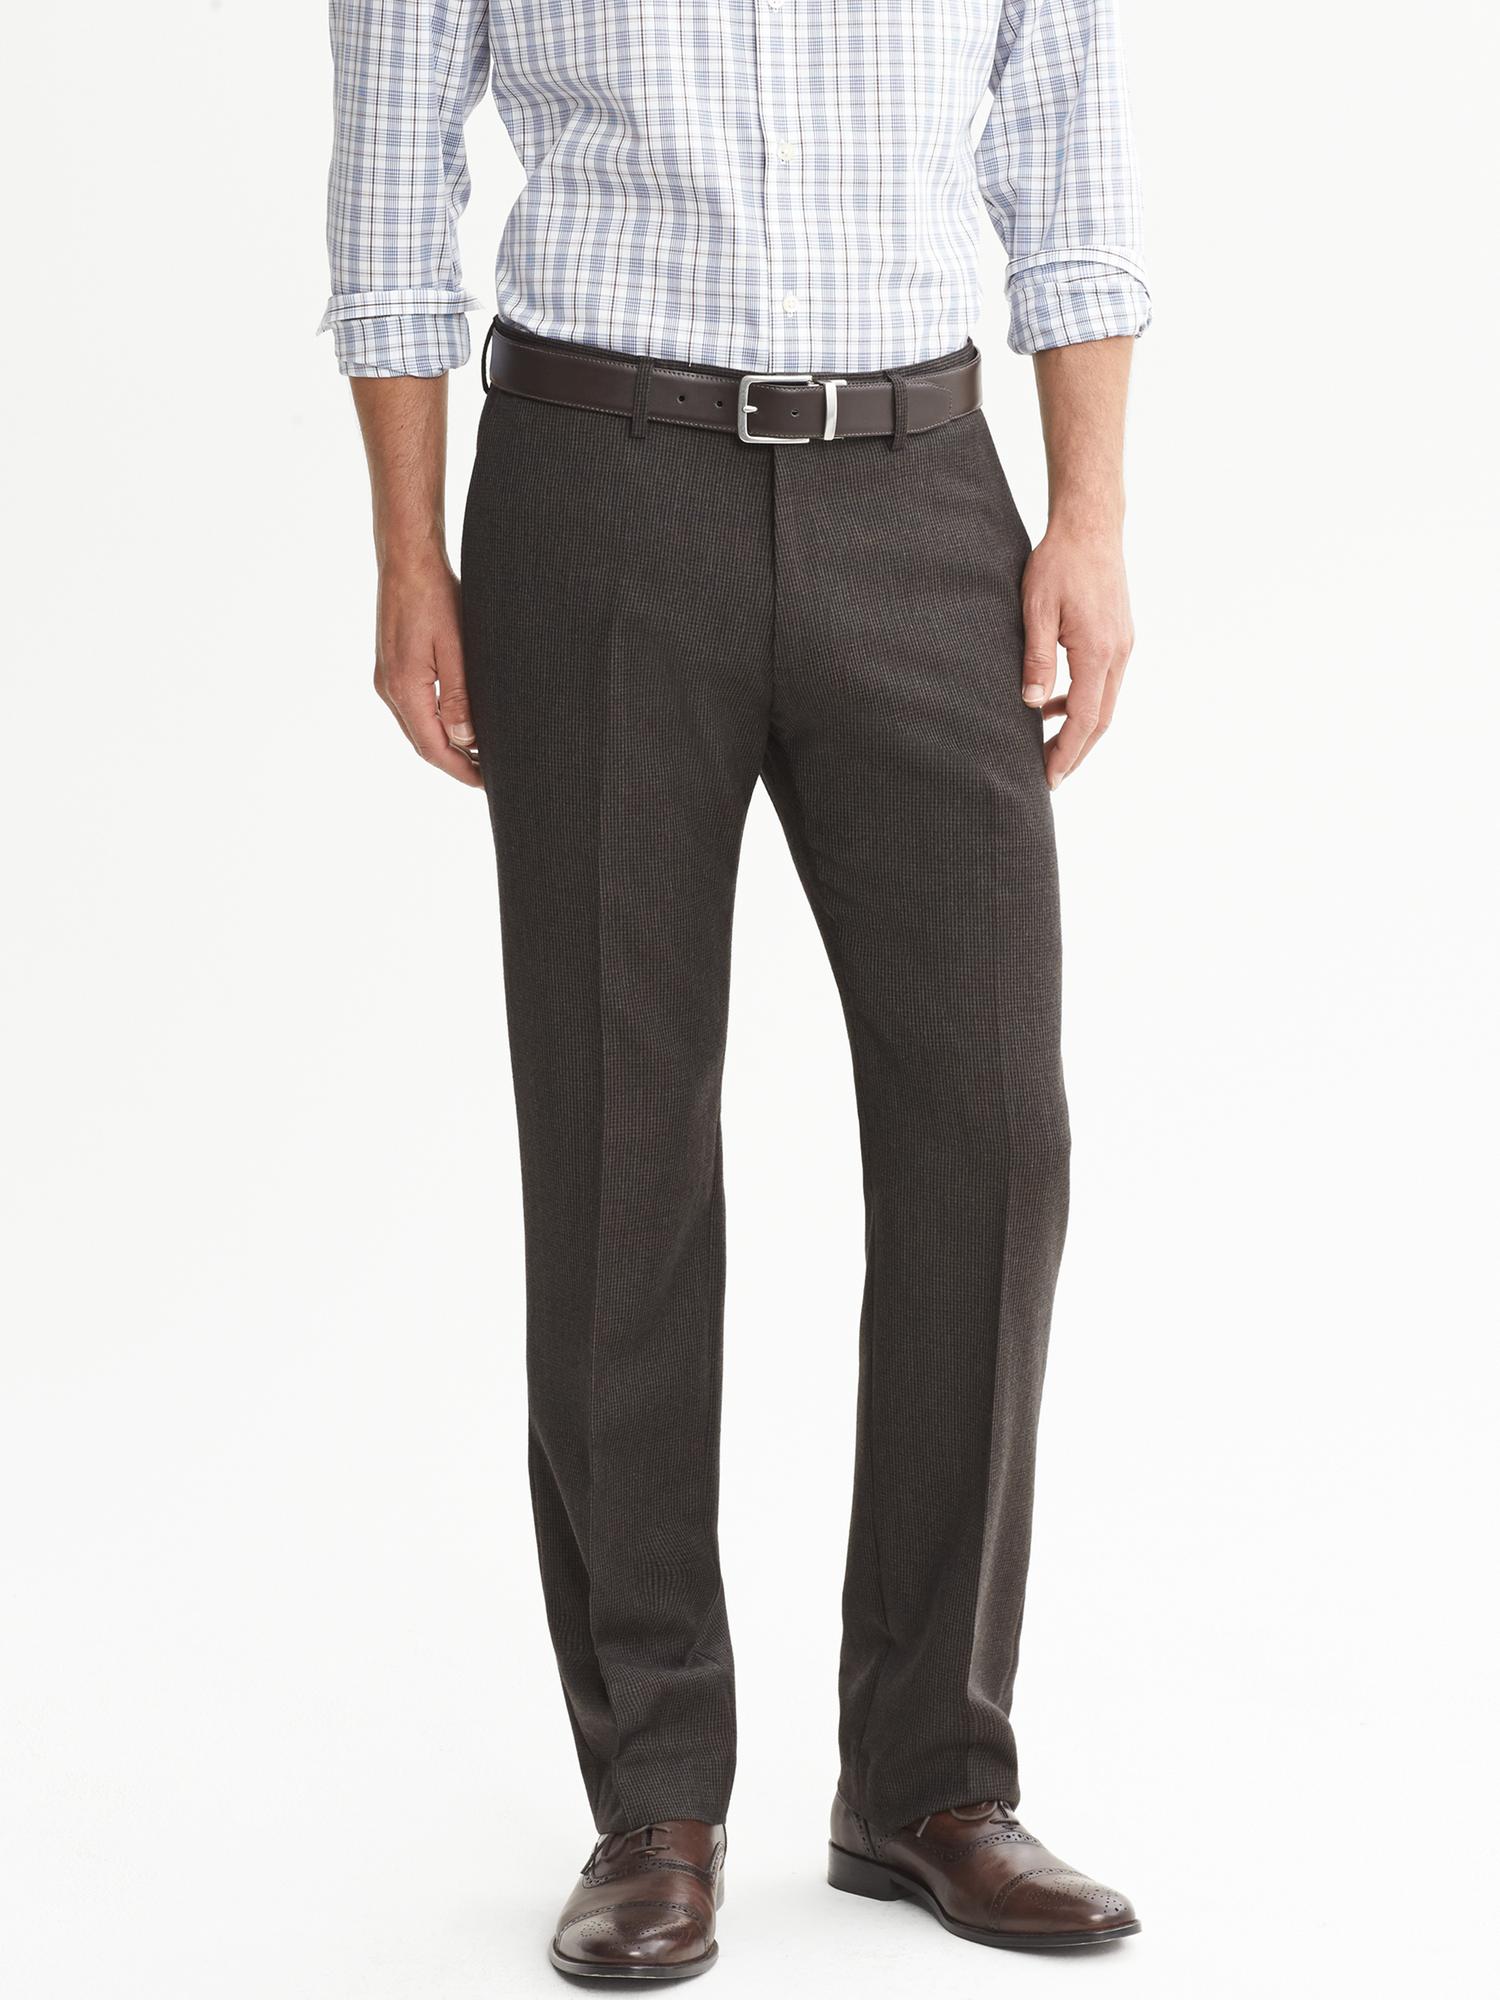 Tailored Slim-Fit Brown Houndstooth Flannel Dress Pant